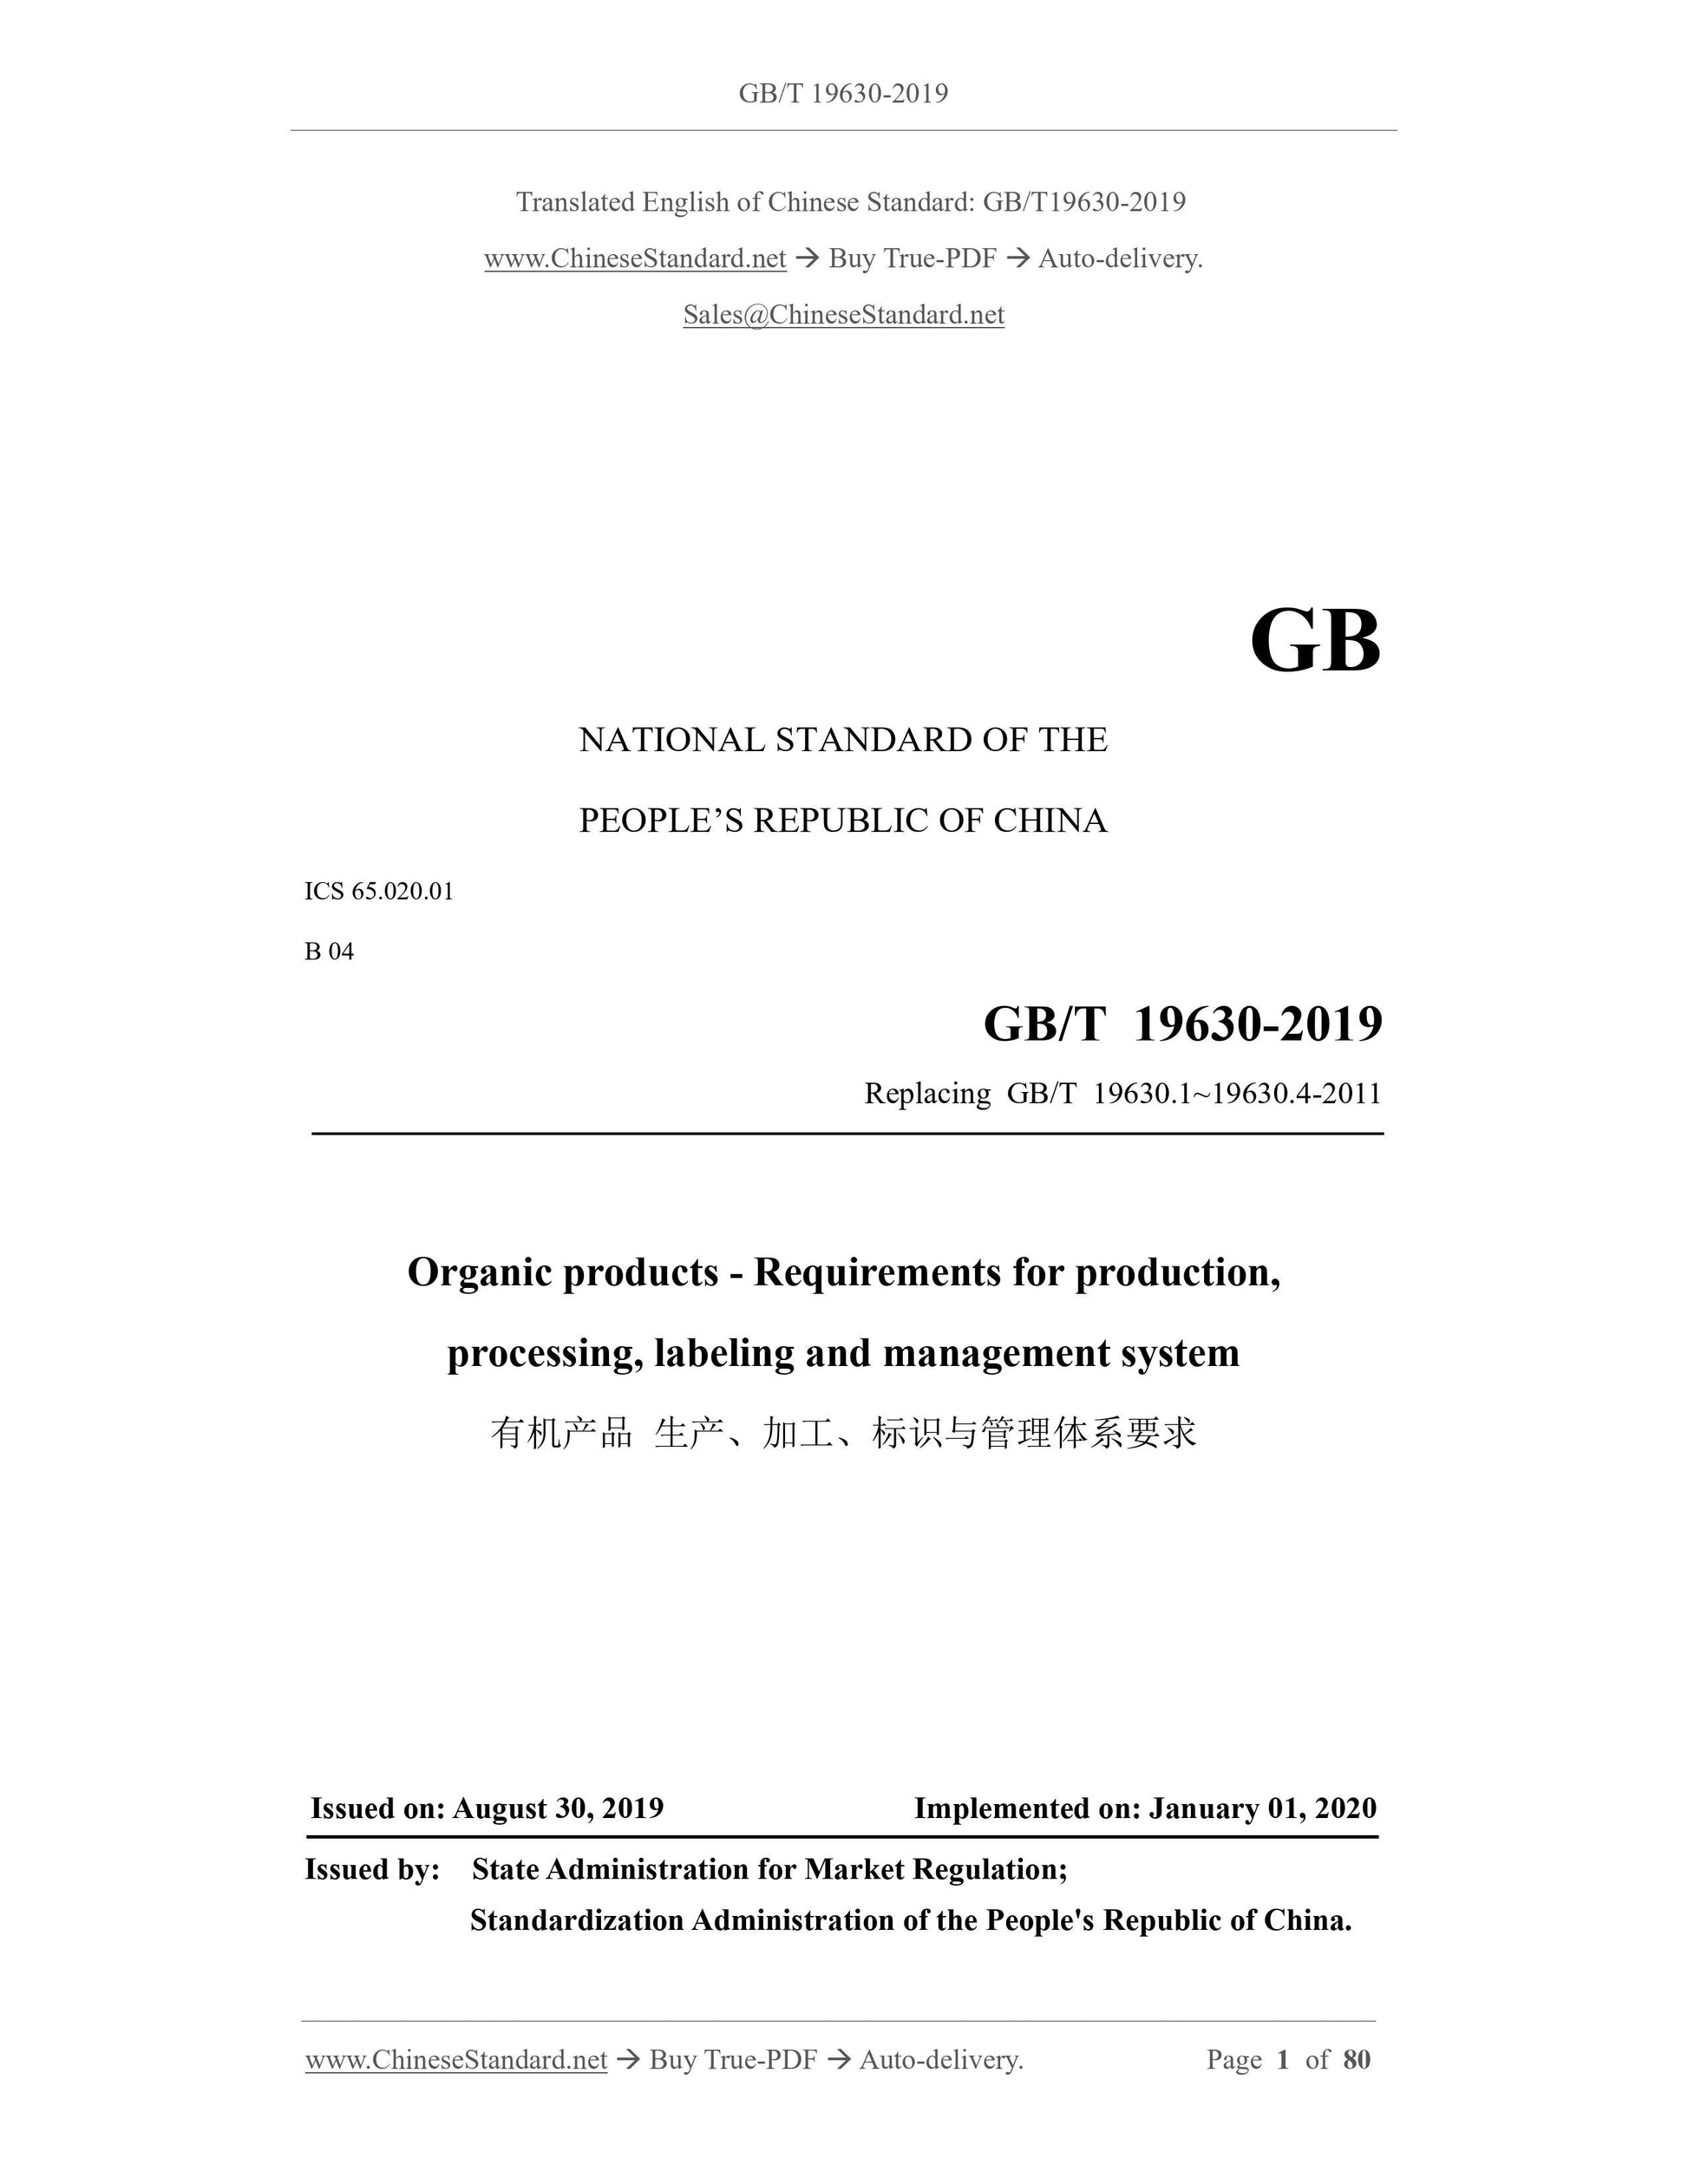 GB/T 19630-2019 Page 1